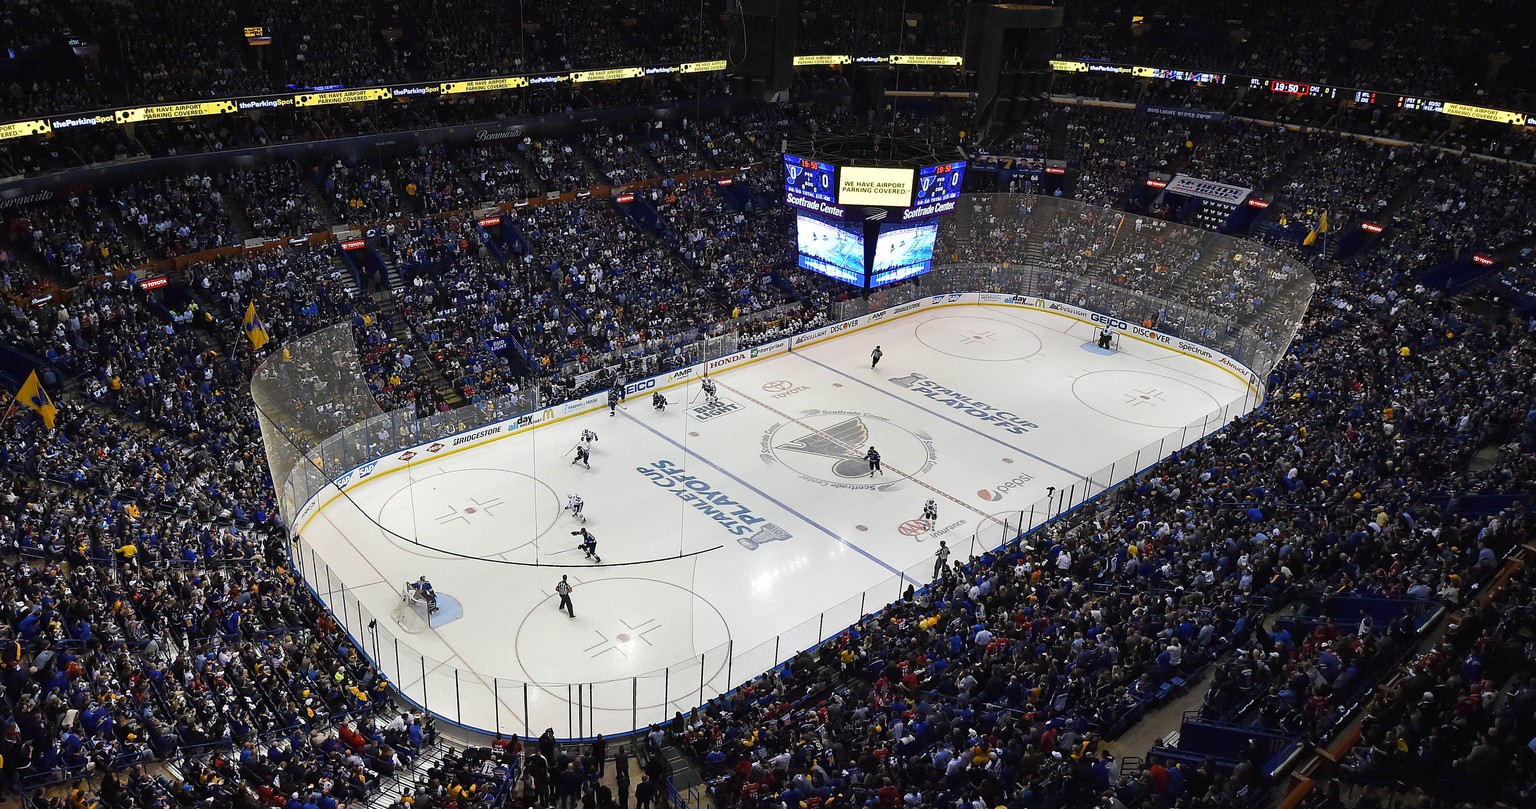 Apr 21, 2016; St. Louis, MO, USA; A overall view during game five of the first round of the 2016 Stanley Cup Playoffs between the St. Louis Blues and the Chicago Blackhawks at Scottrade Center. Mandat ...